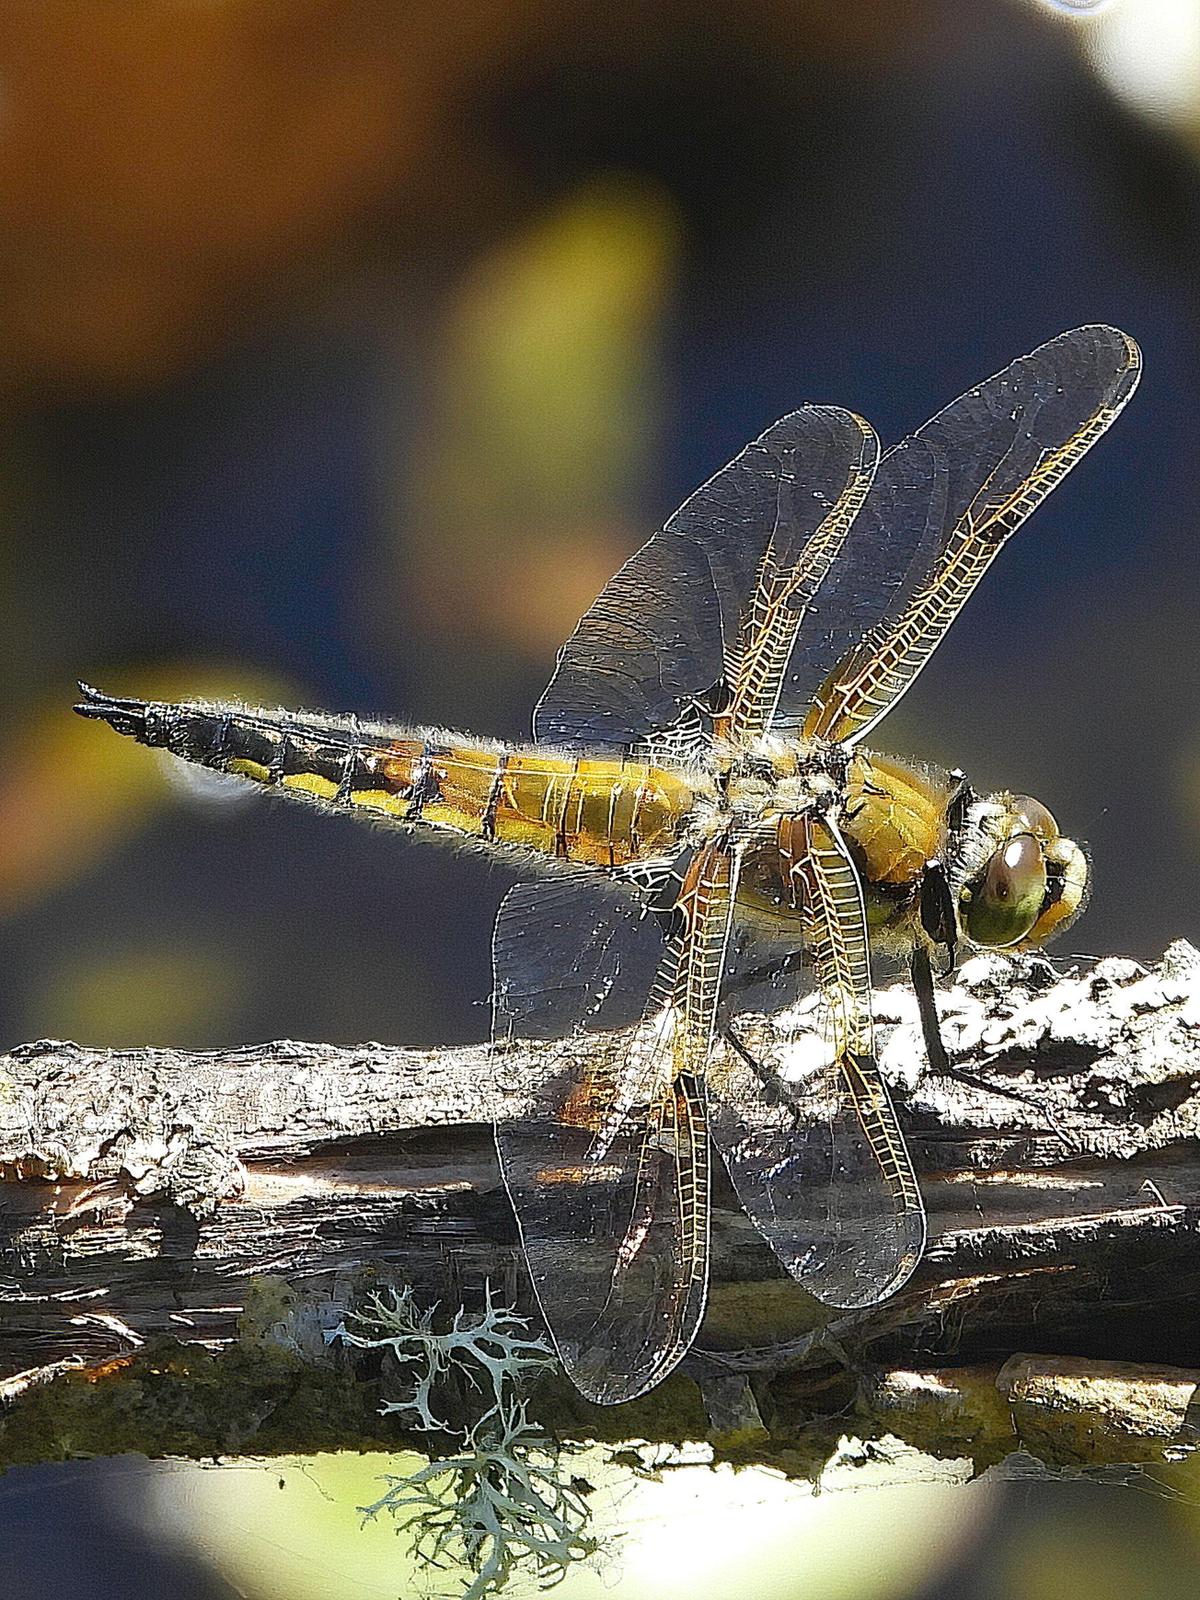 Four-spotted Skimmer Photo by Dan Tallman